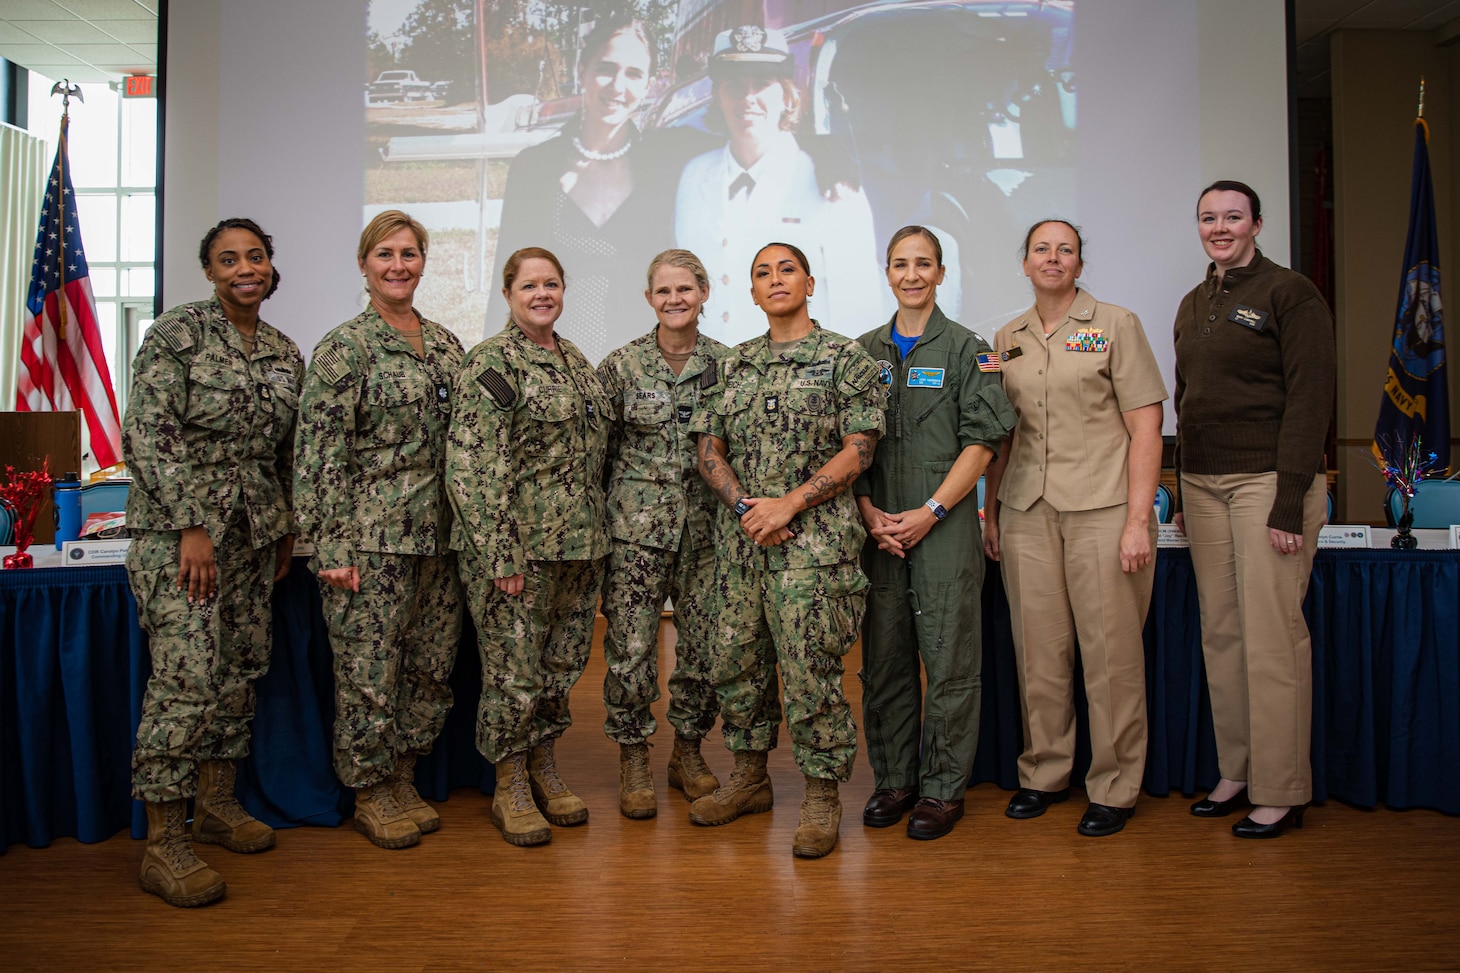 Sailors assigned to U.S. Naval Forces Southern Command/U.S. Fourth Fleet hosted a Women’s History Month event at Naval Station Mayport, Fla., March 28, 2023.